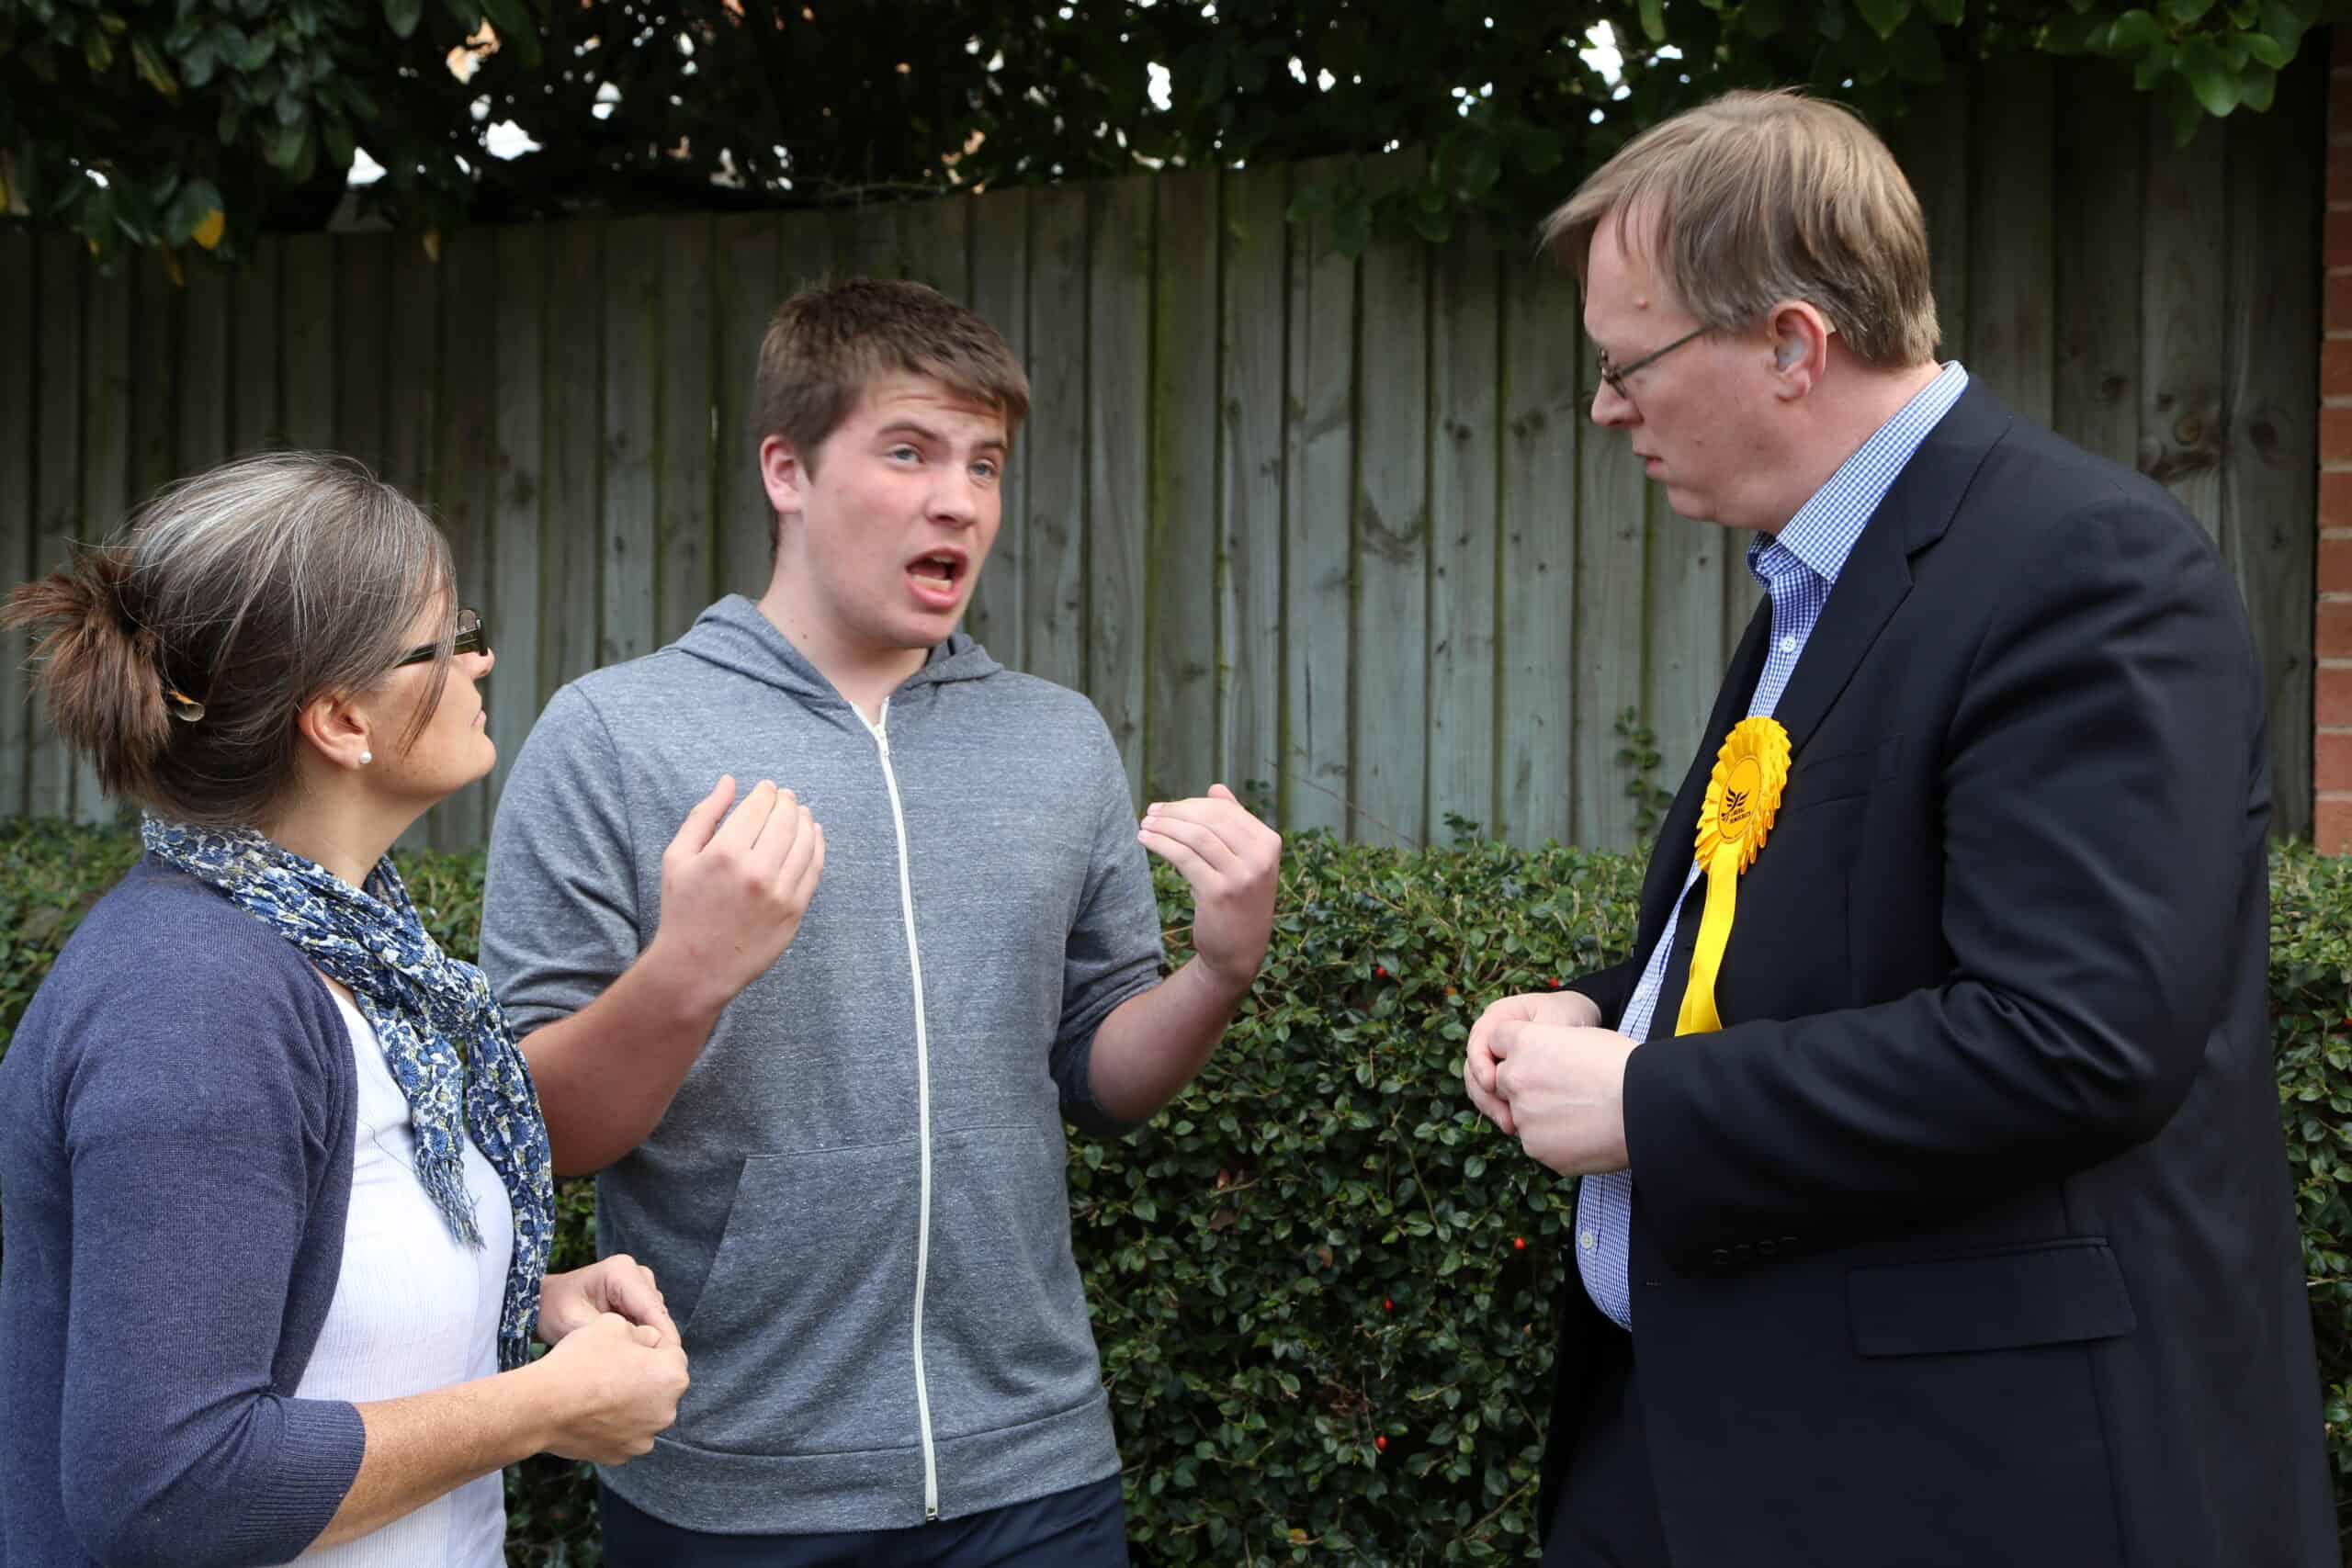 Two men and a woman engaged in a discussion outdoors, one man wearing a yellow rosette.